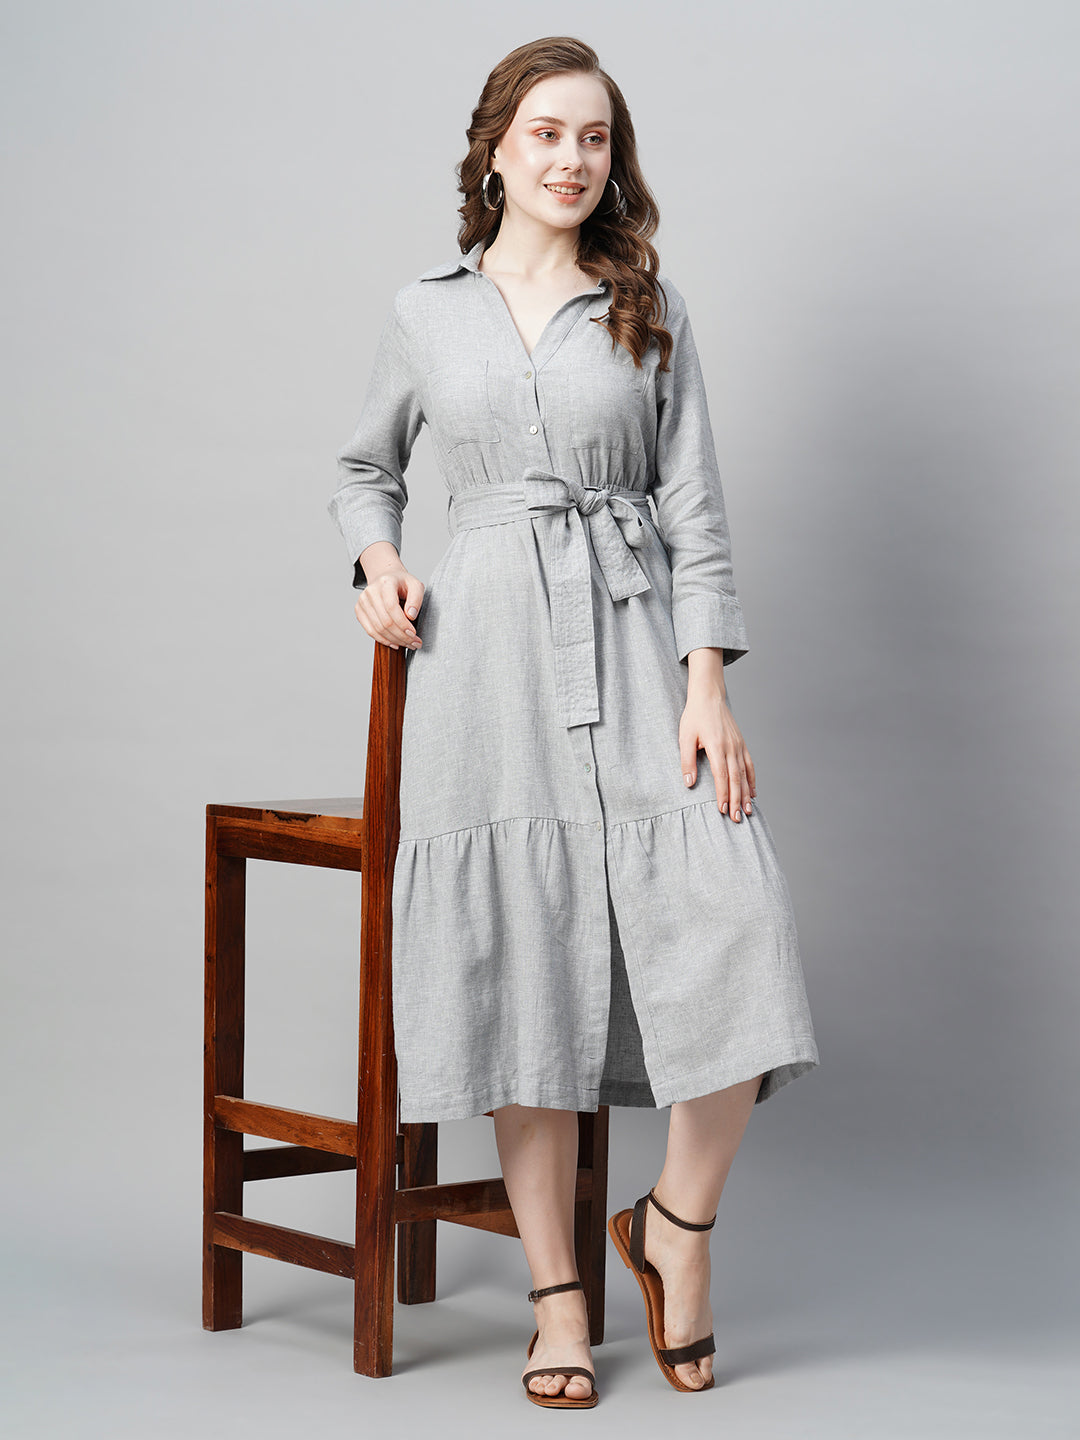 Homenesgenics Sale Clearance! Summer Dresses for Women Clearance under $10  Free Shipping Fashion Women Loose V-Neck Summer Solid Short Sleeve Cotton  and Linen Dress 